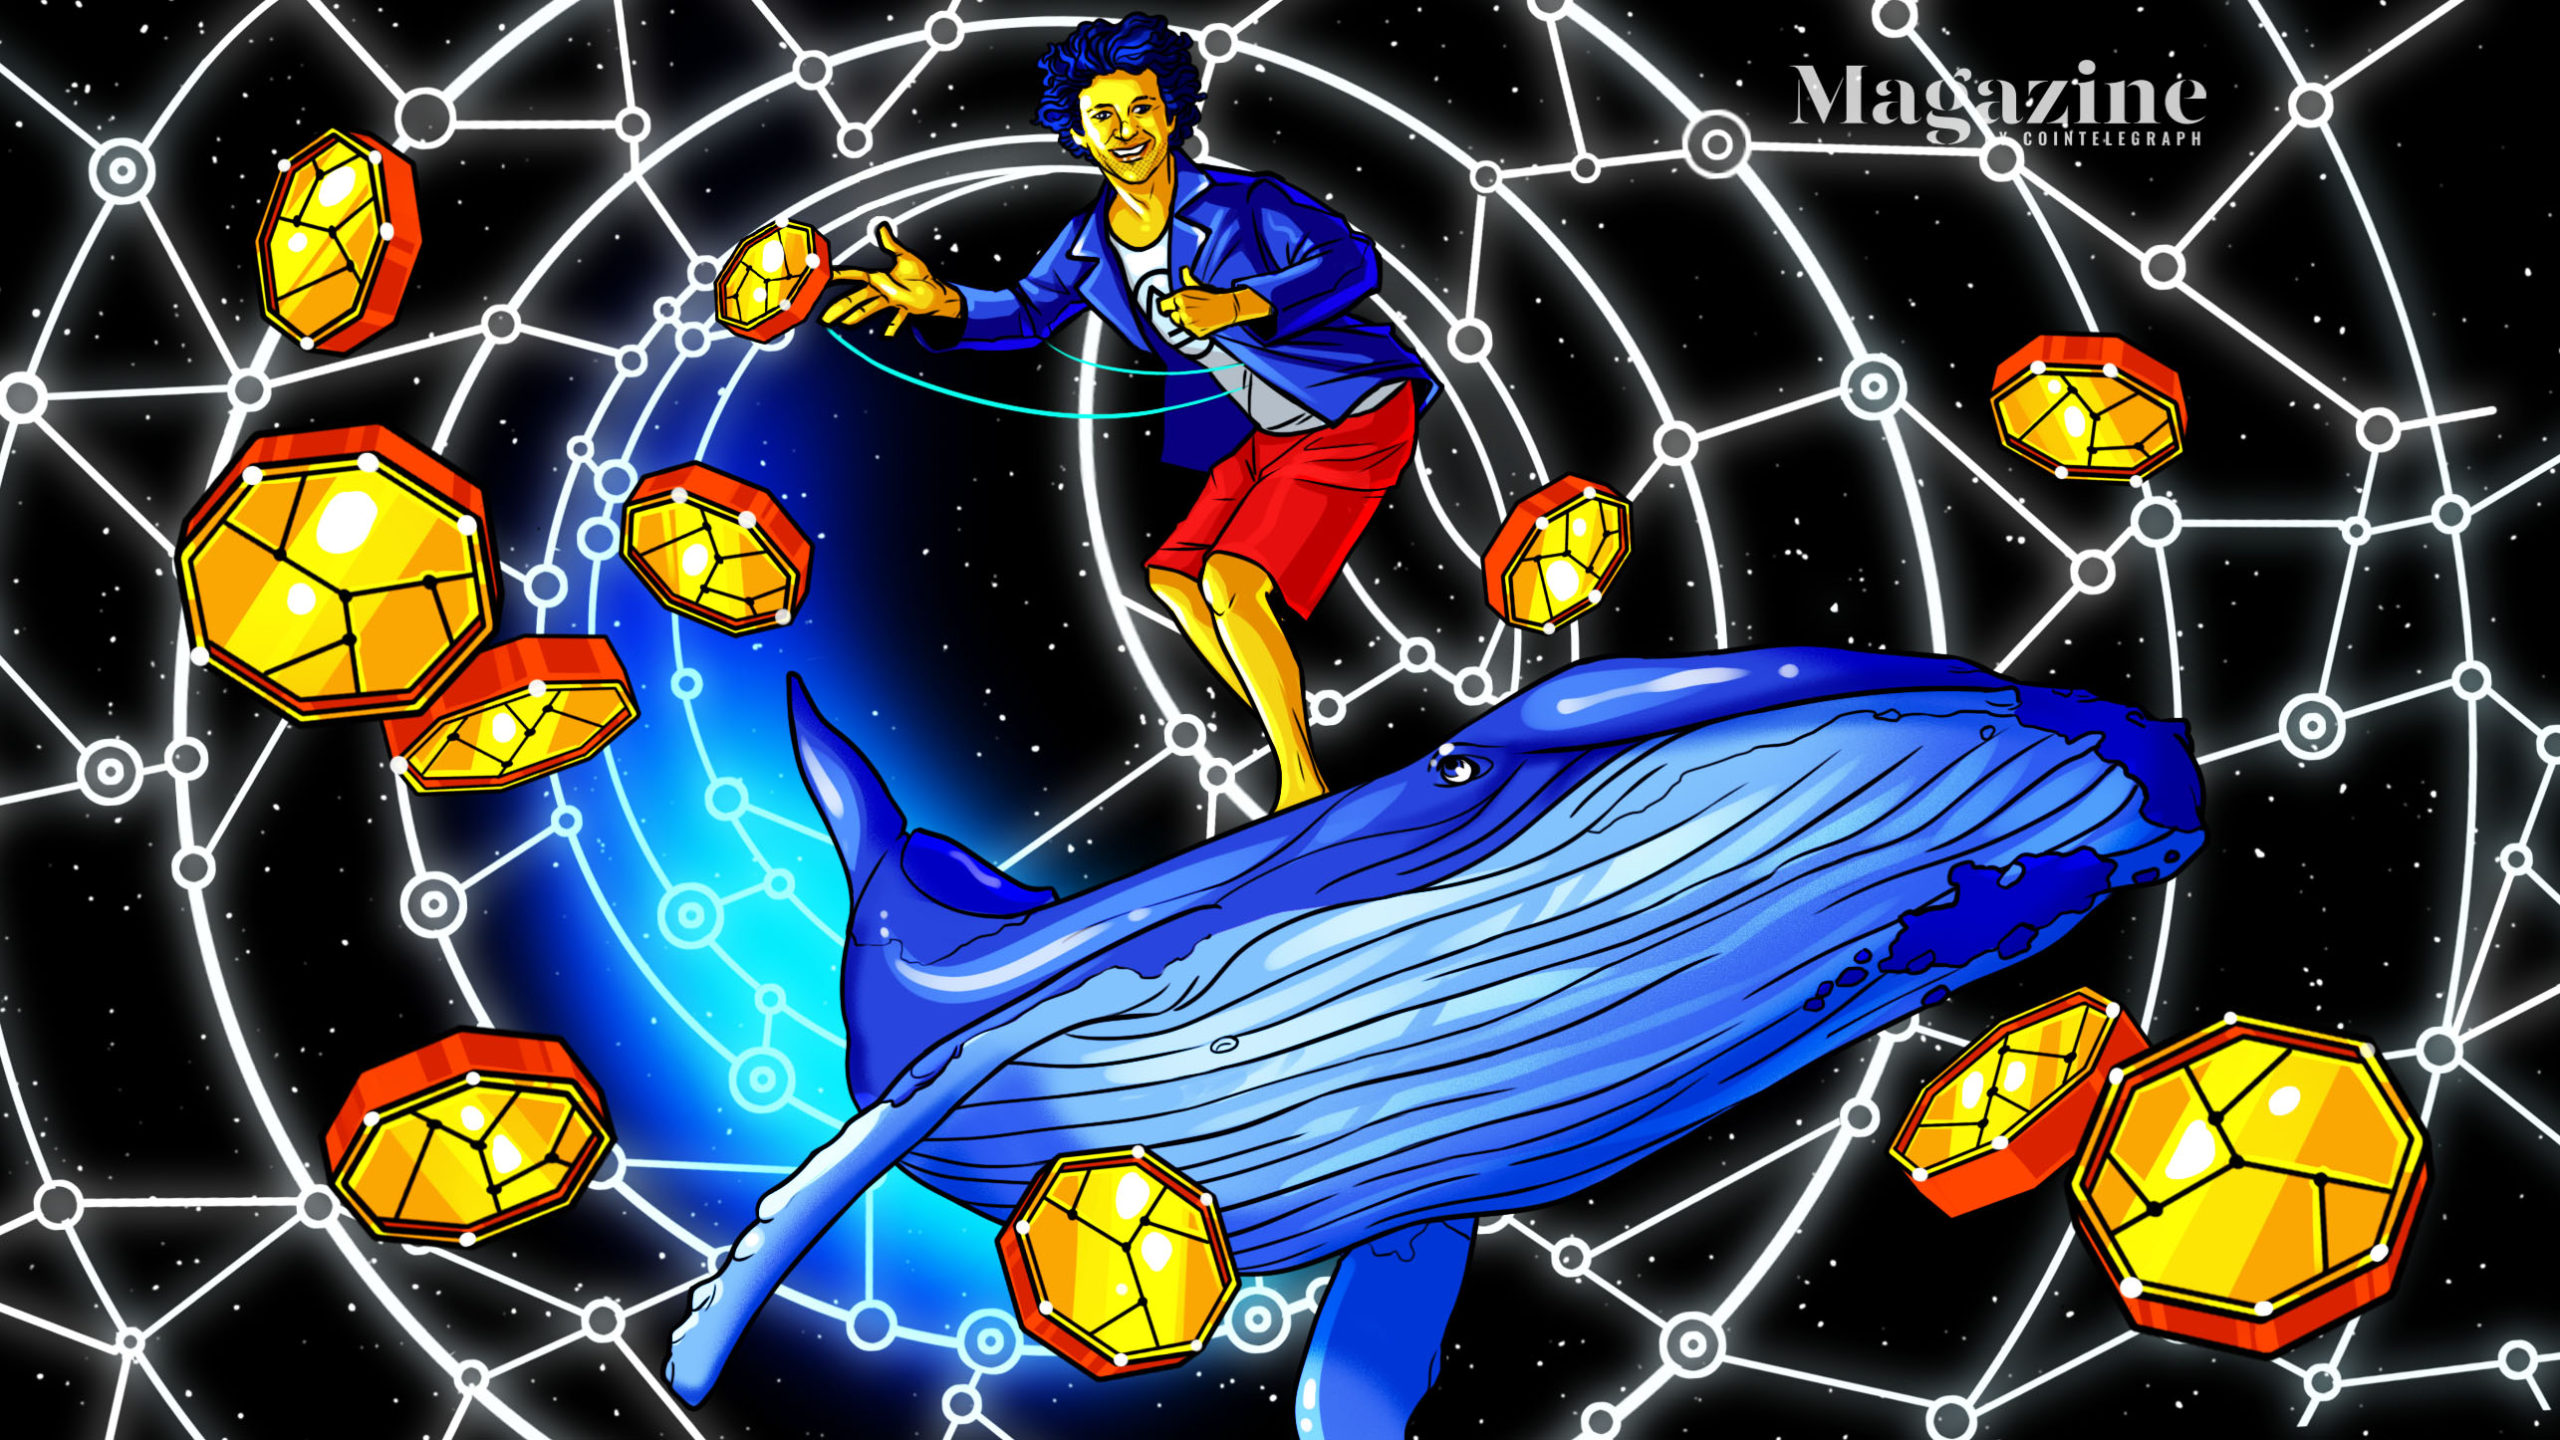 Sam Bankman-Fried: The crypto whale who wants to give billions away